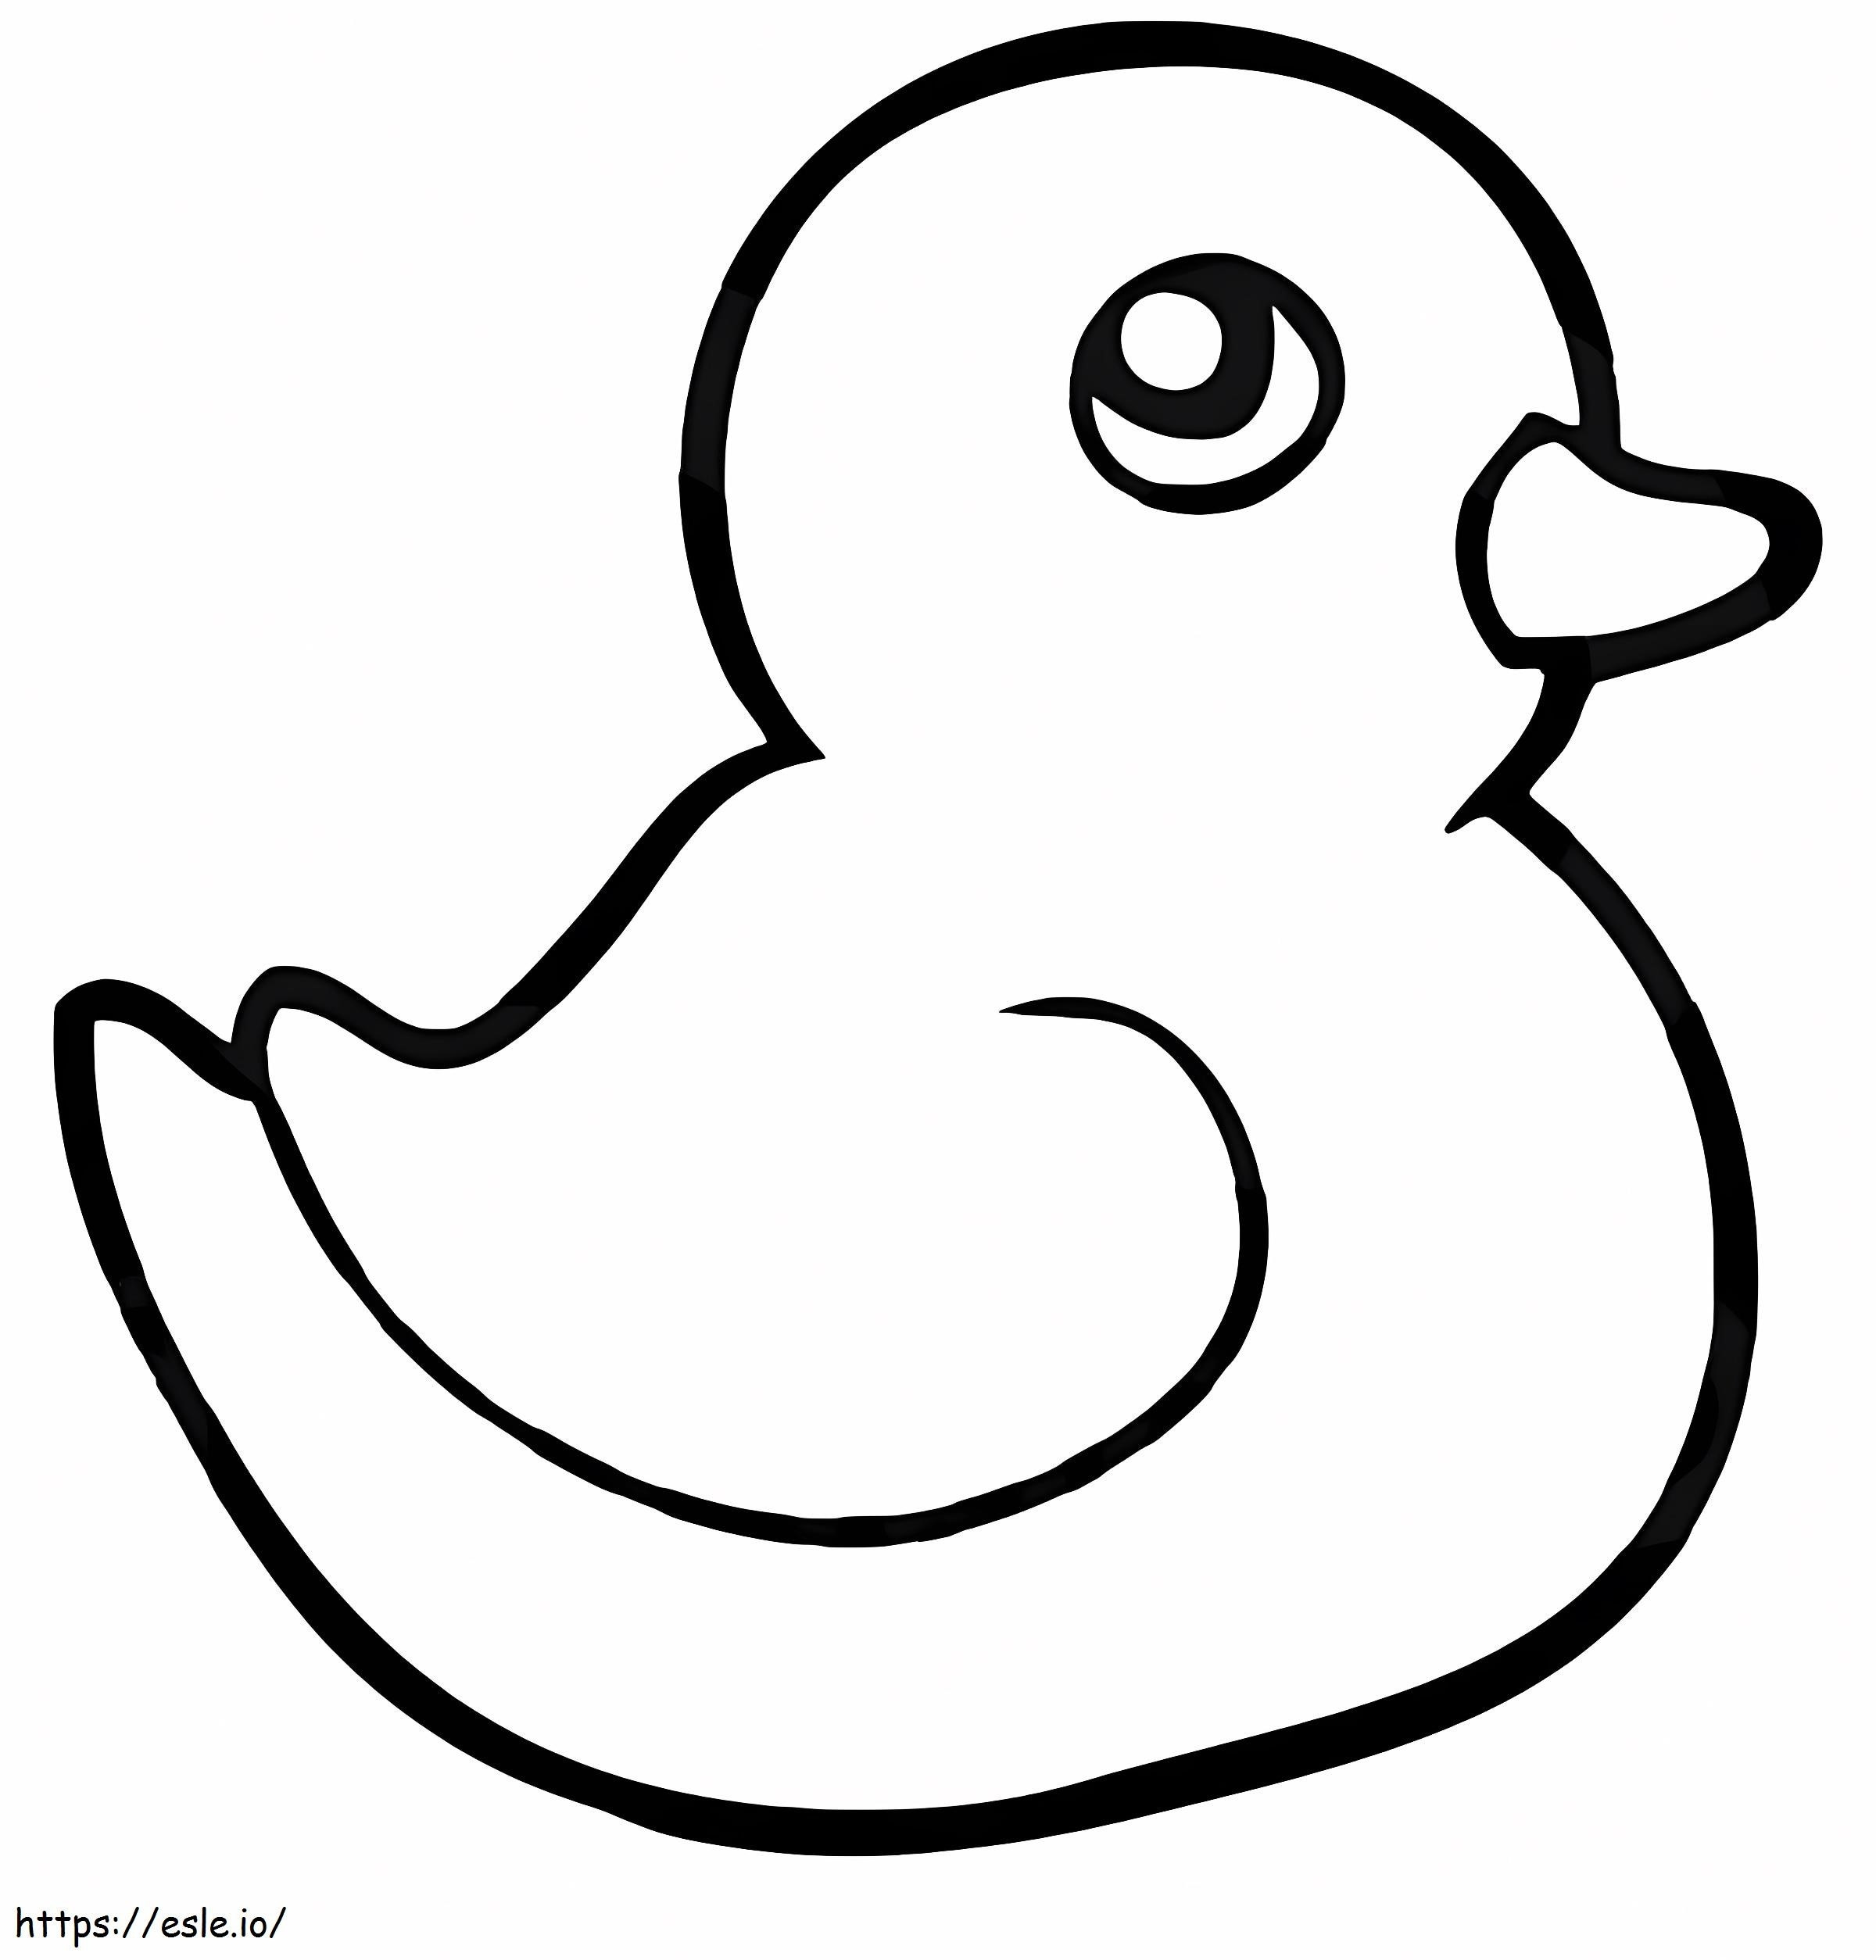 Easy Rubber Duck coloring page